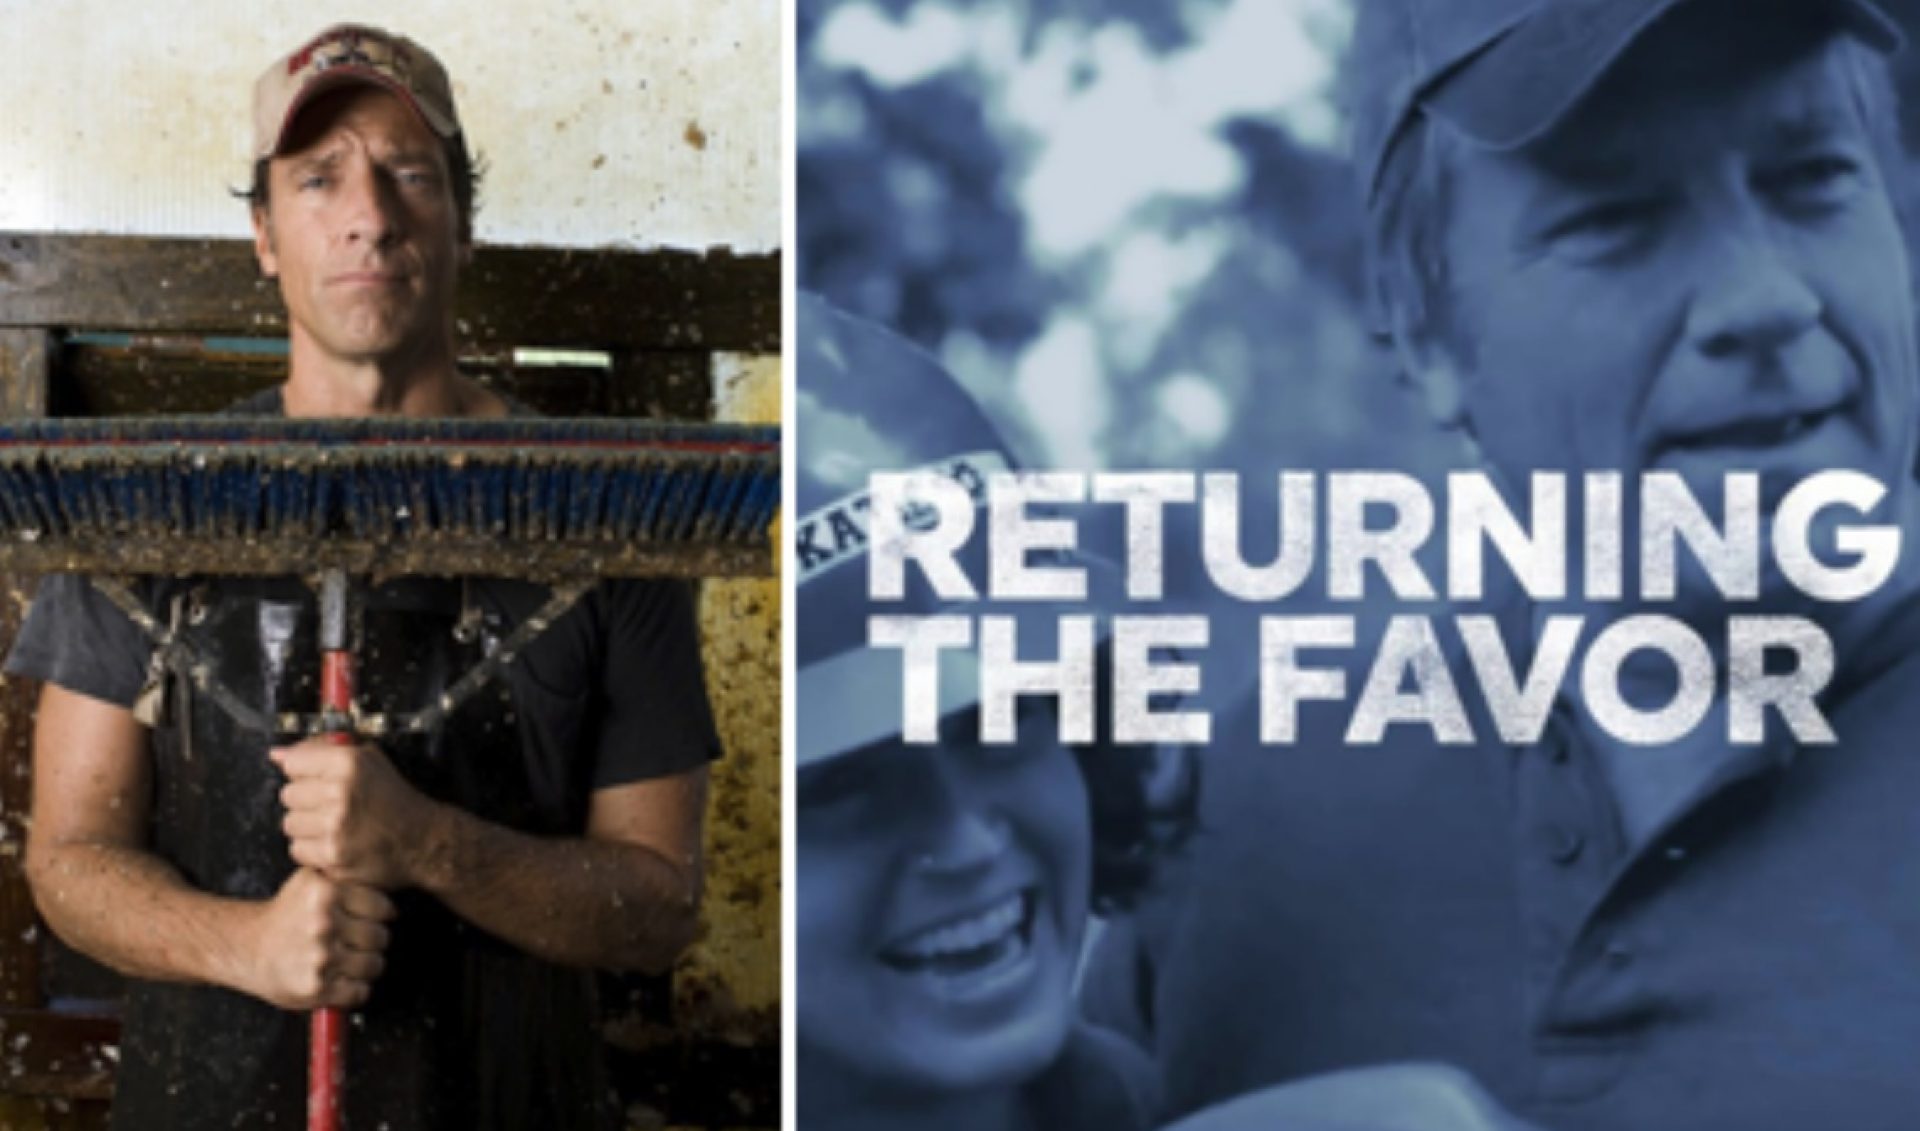 Mike Rowe’s ‘Returning The Favor’ Looks To “Foster A Community” On Facebook